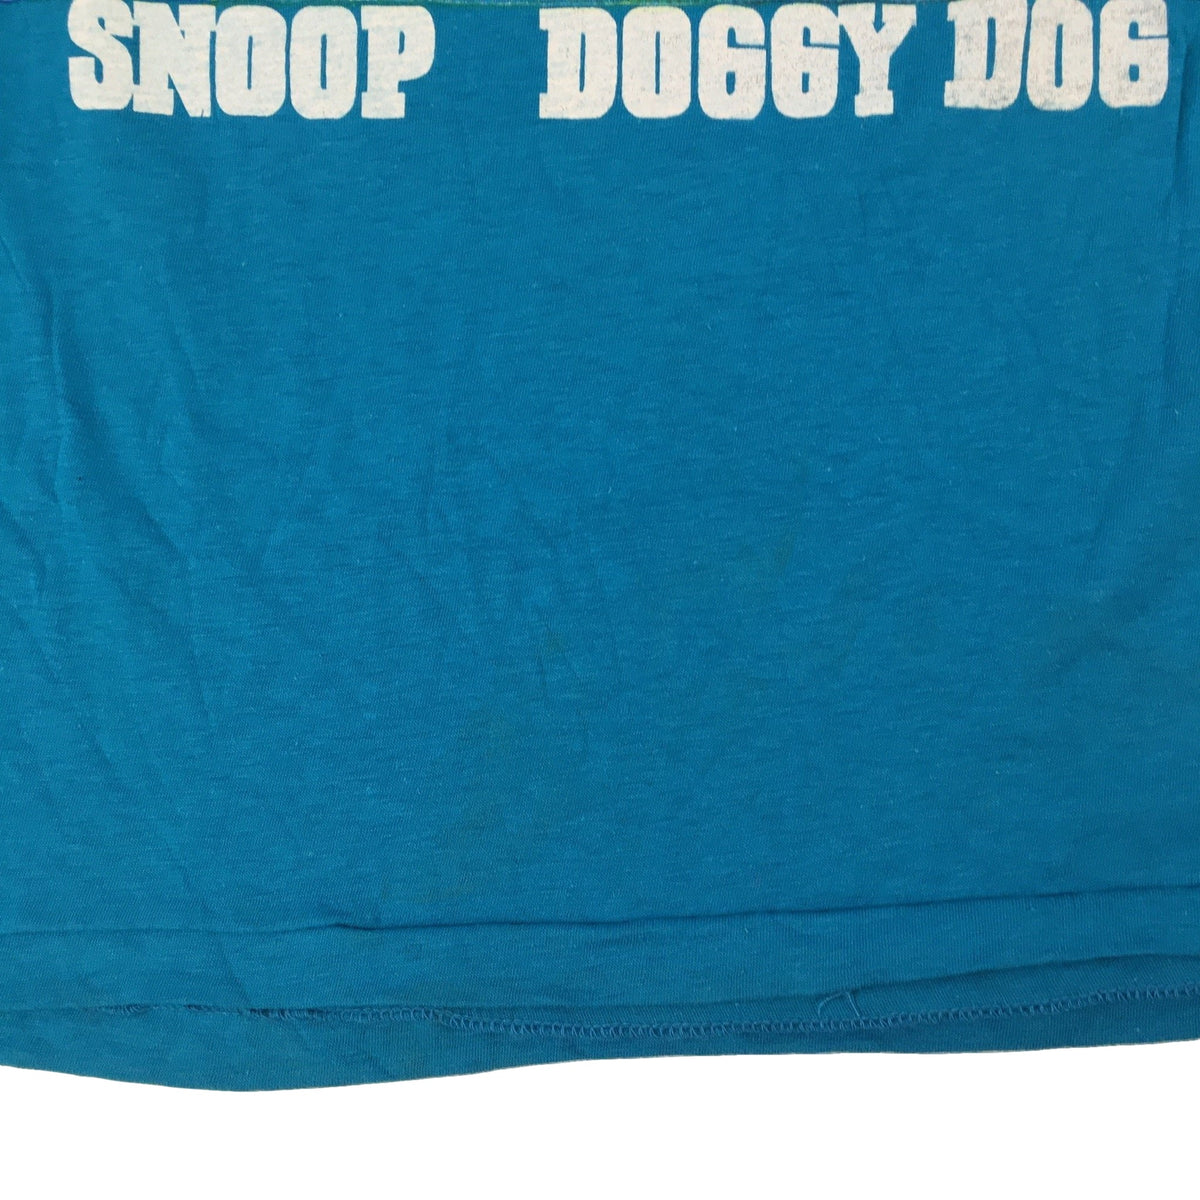 Vintage Snoop Dogg &quot;Doggy Dog&quot; T-Shirt - jointcustodydc